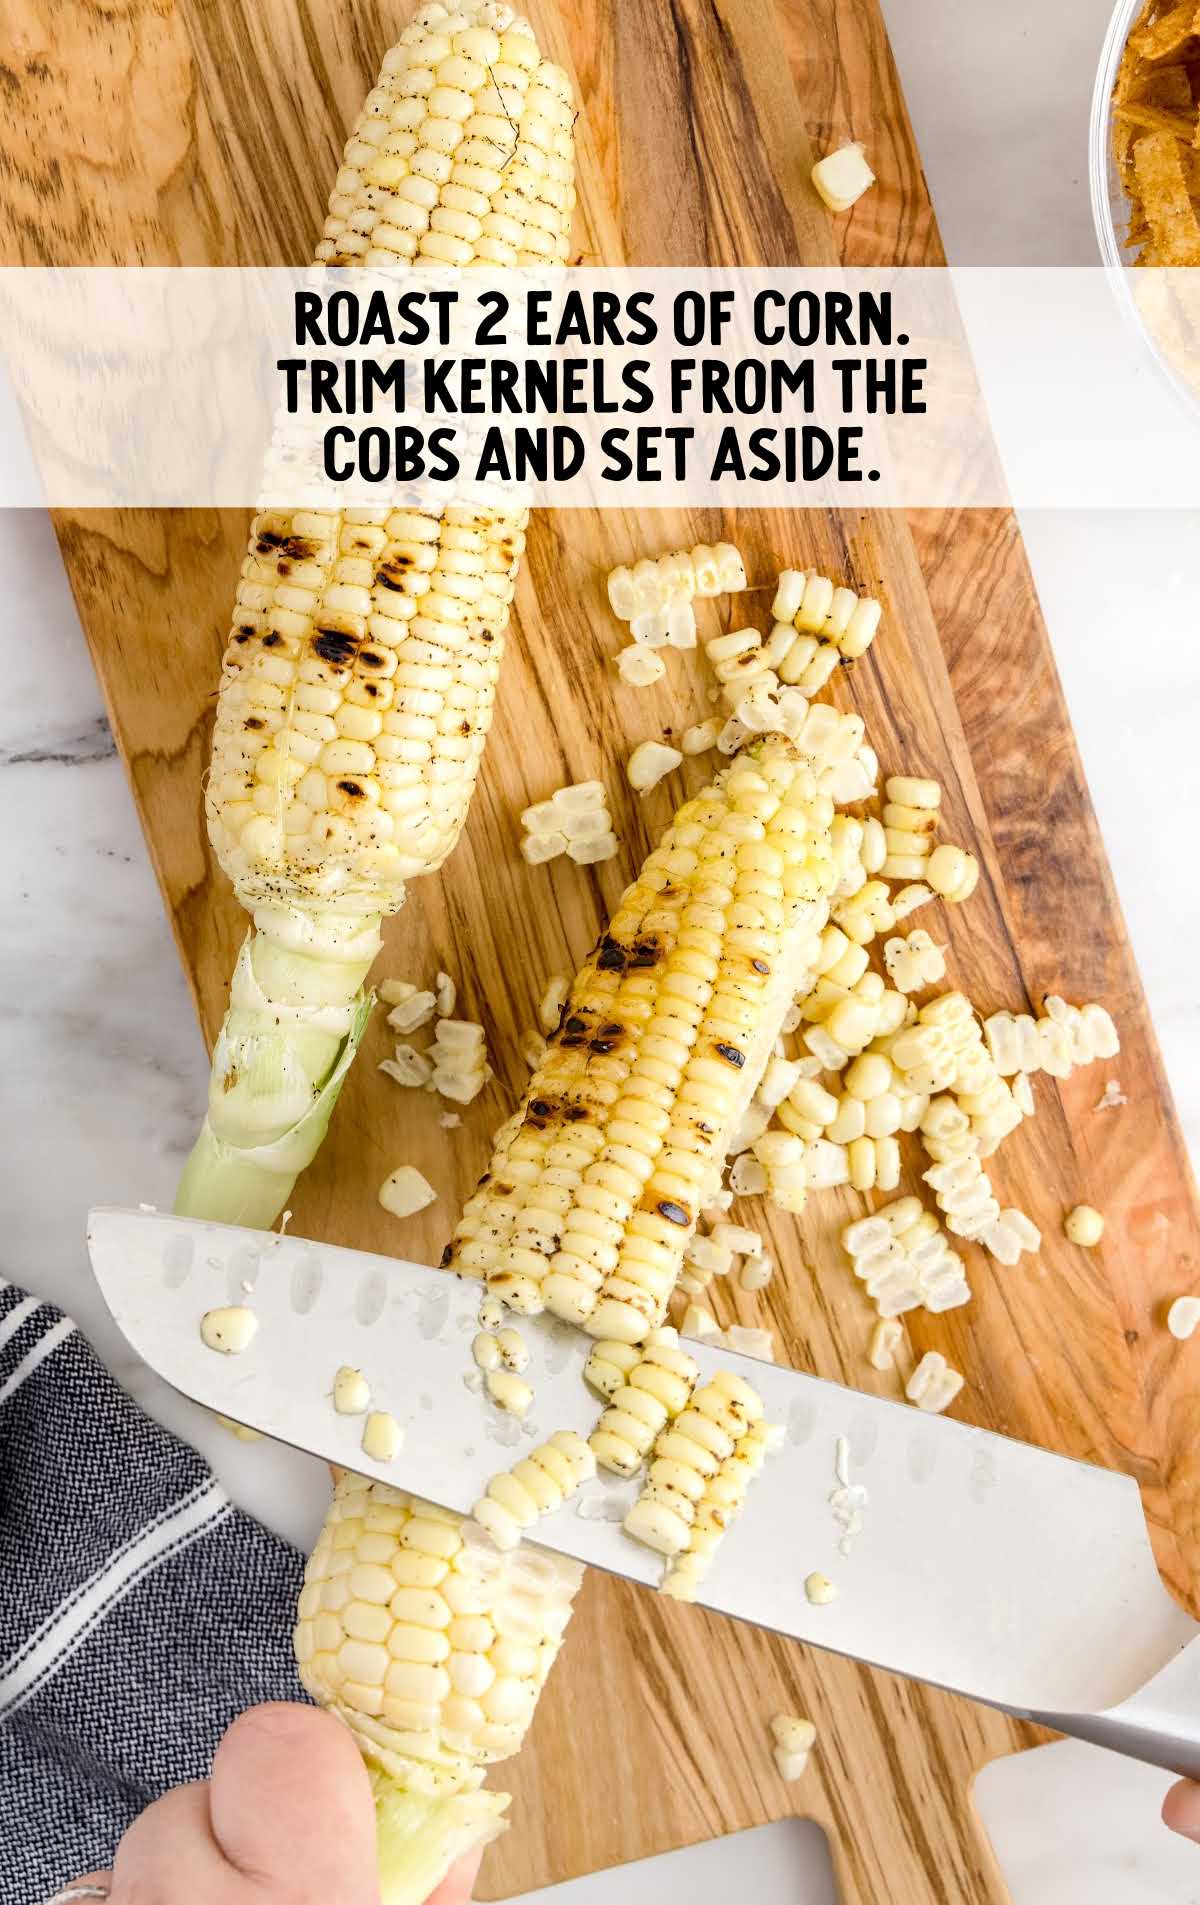 kernels trimmed from the corn cobb